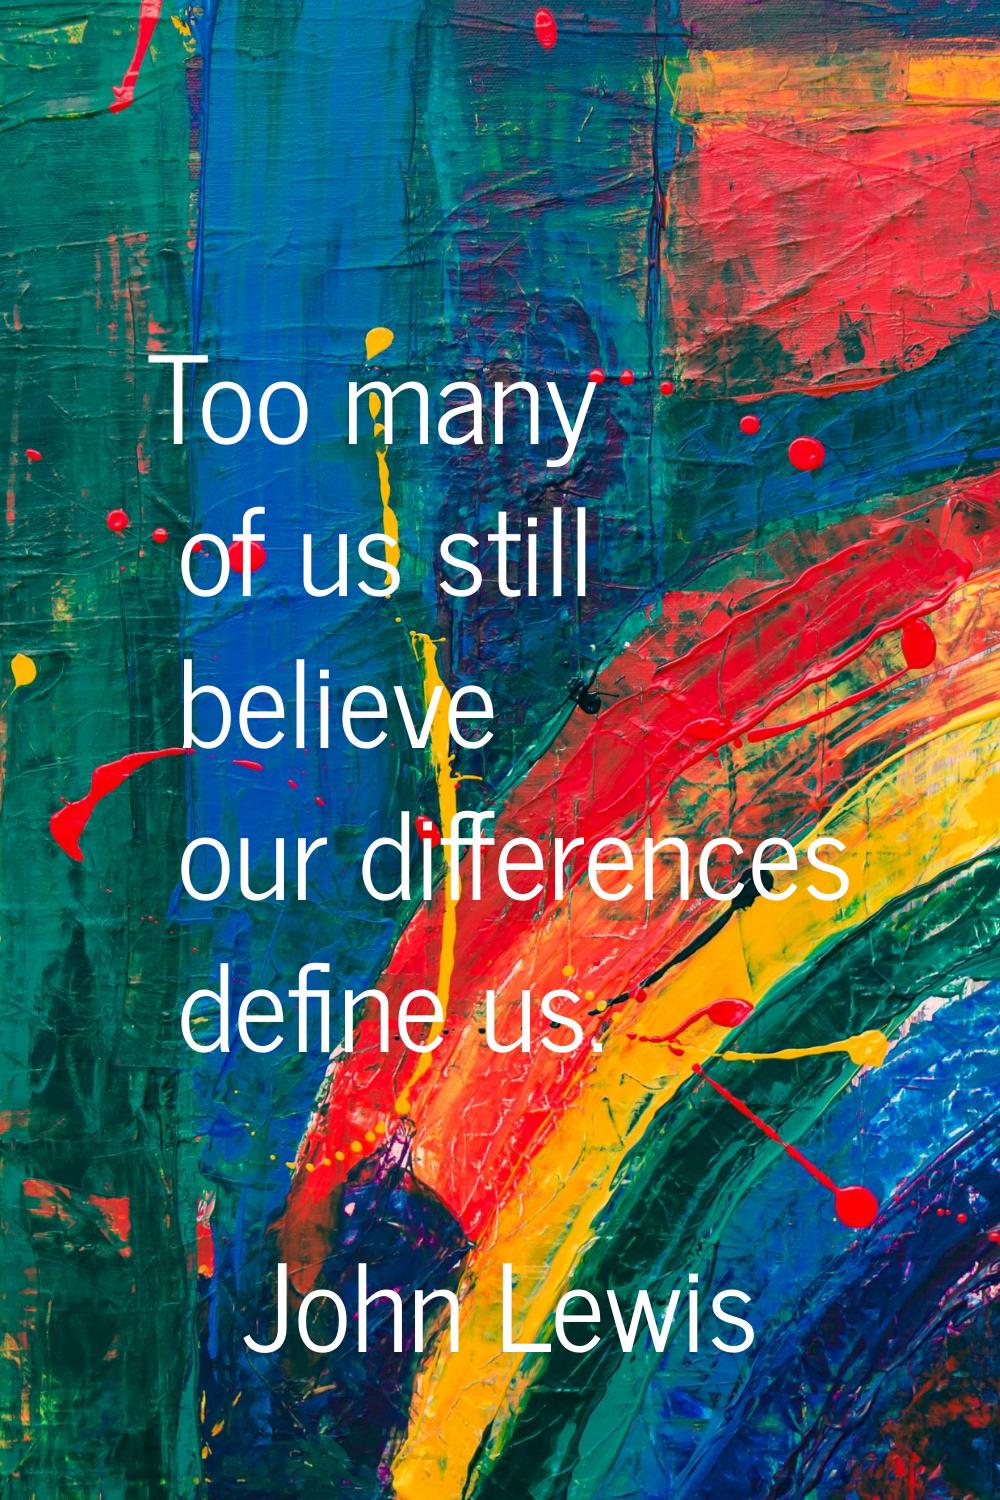 Too many of us still believe our differences define us.